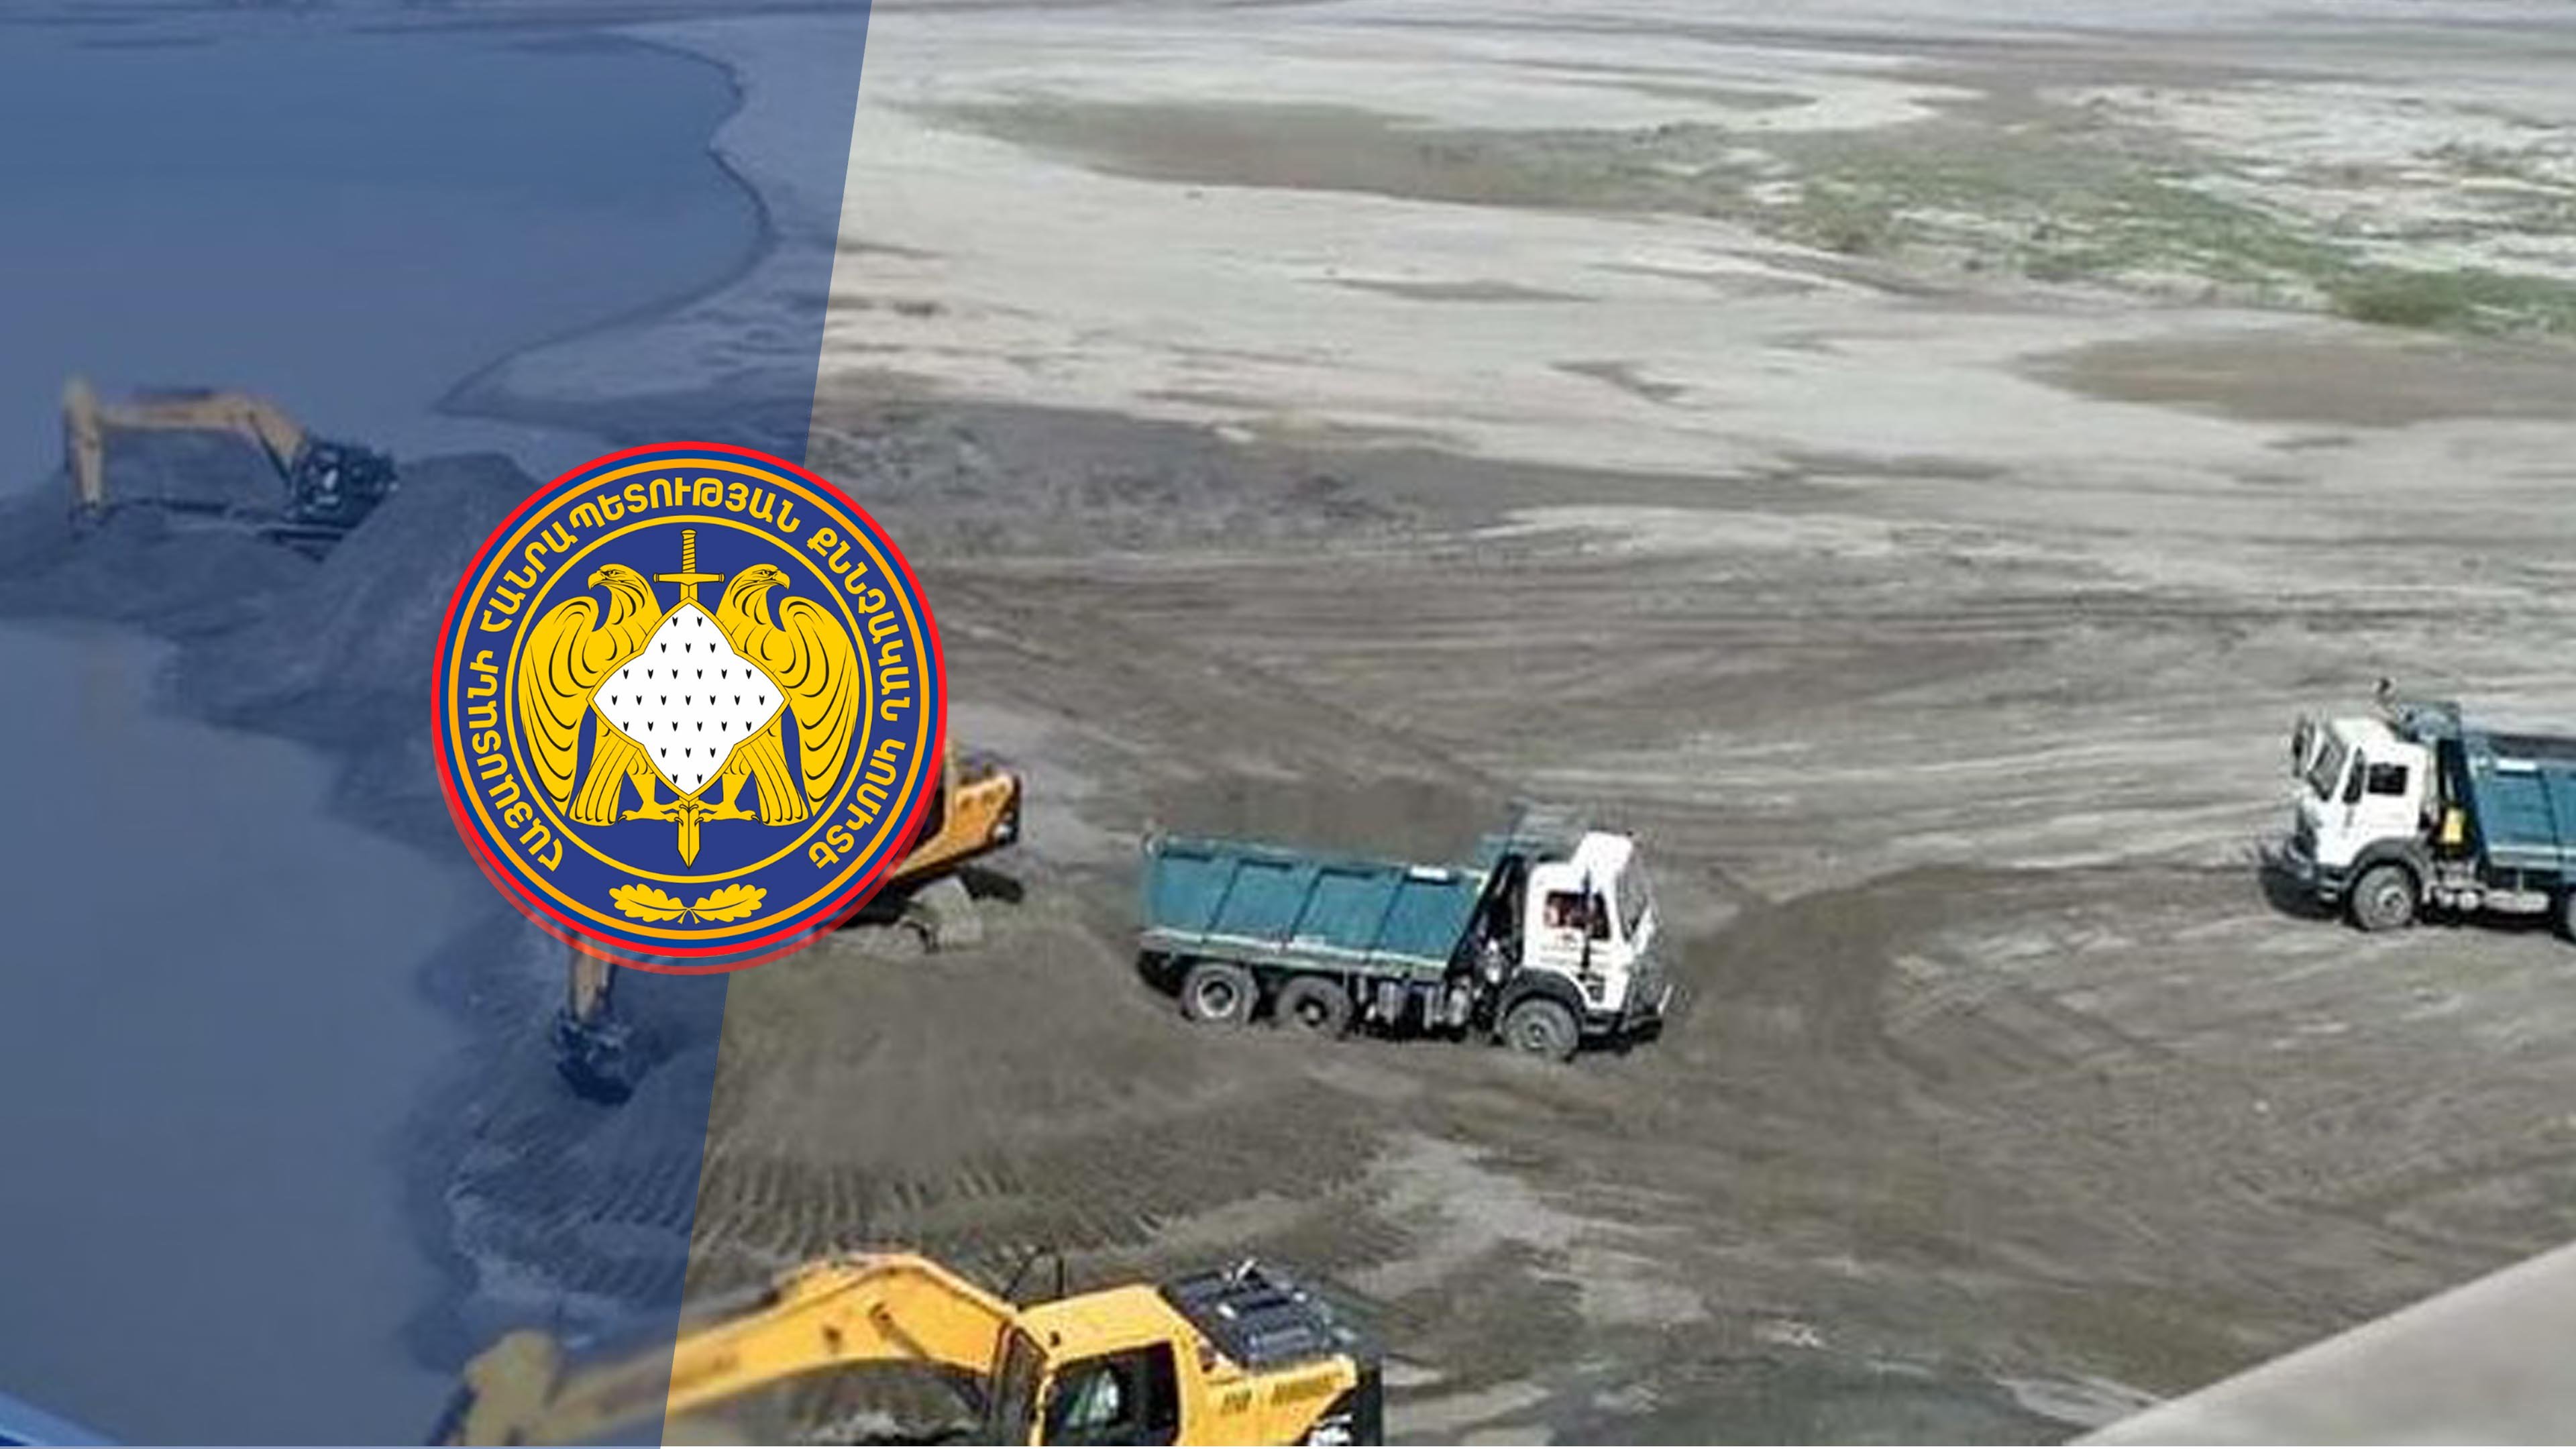 About 1.668.250,6 m³ Sand and Gravel Mixture Extracted Illegally, Pecuniary Damage of about 613.387.403 AMD Caused to State, 78.481.689 AMD of which Recovered